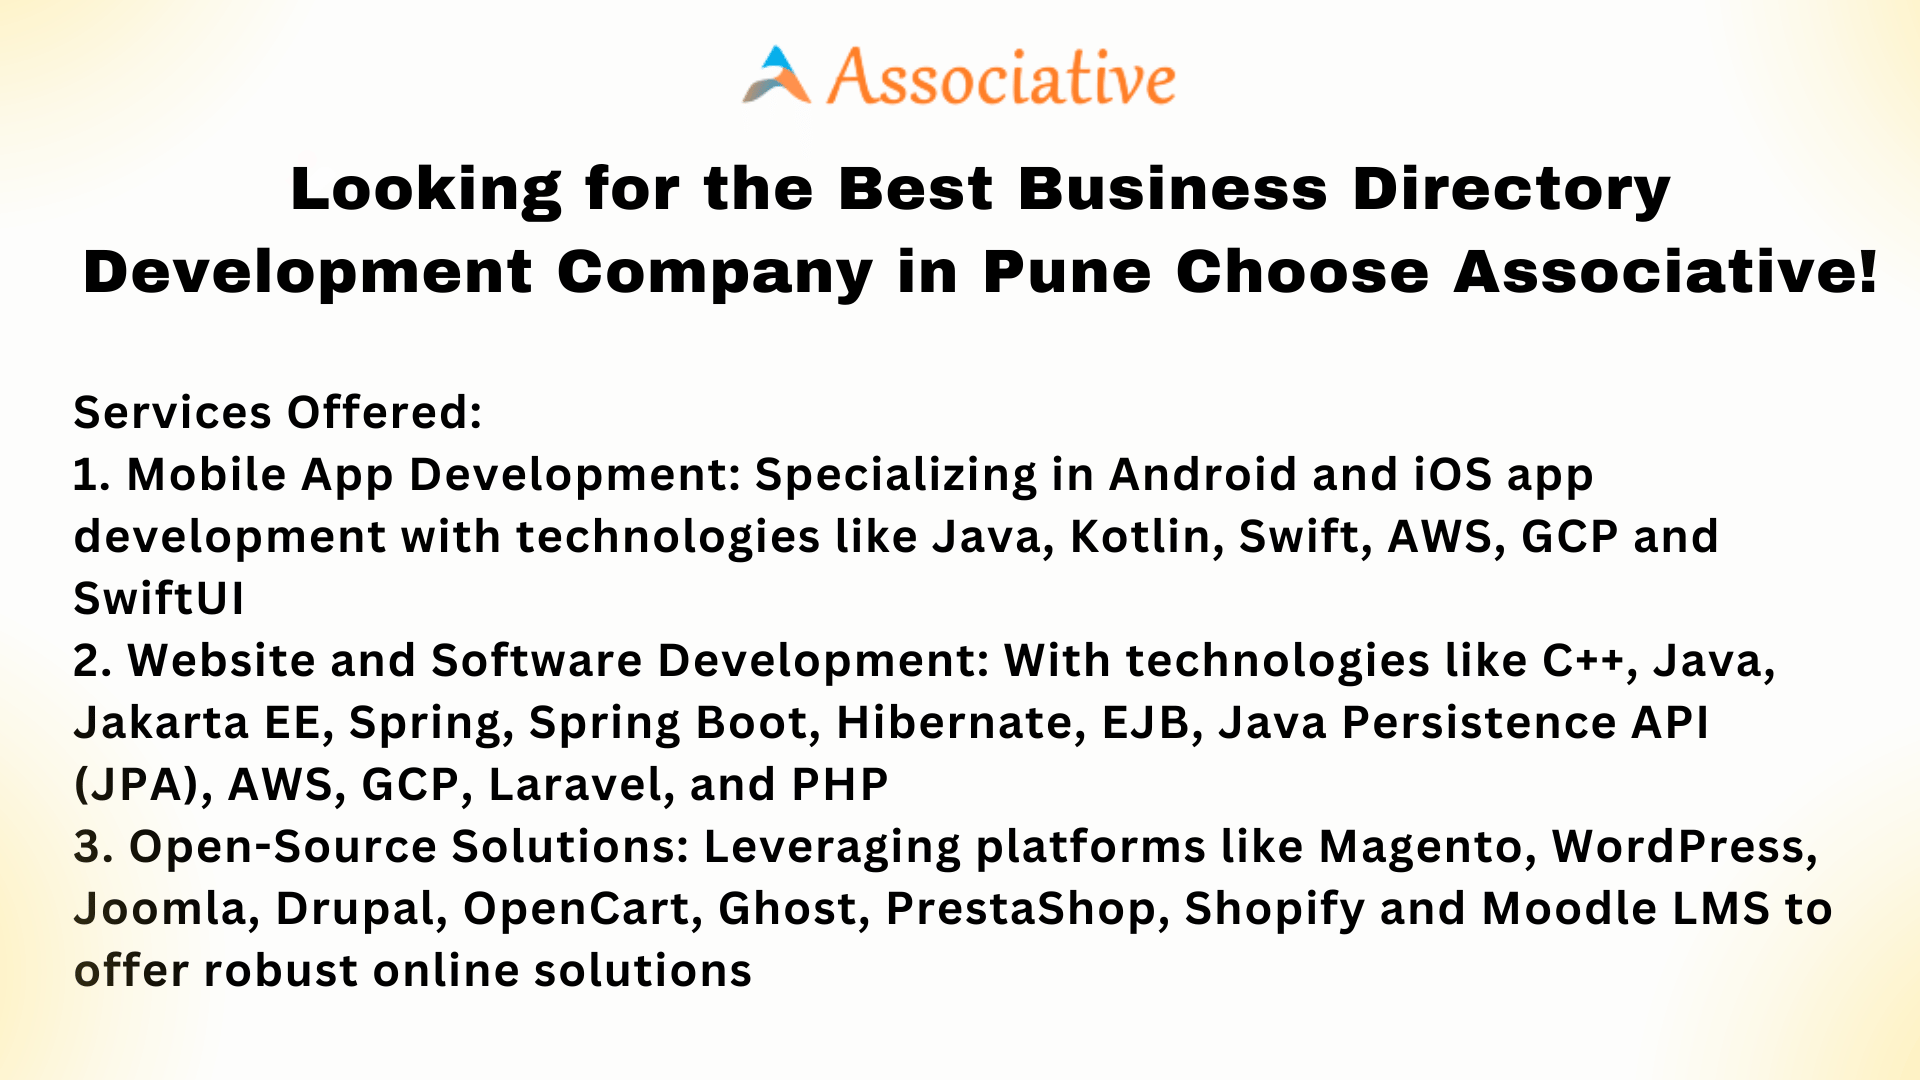 Looking for the Best Business Directory Development Company in Pune Choose Associative!